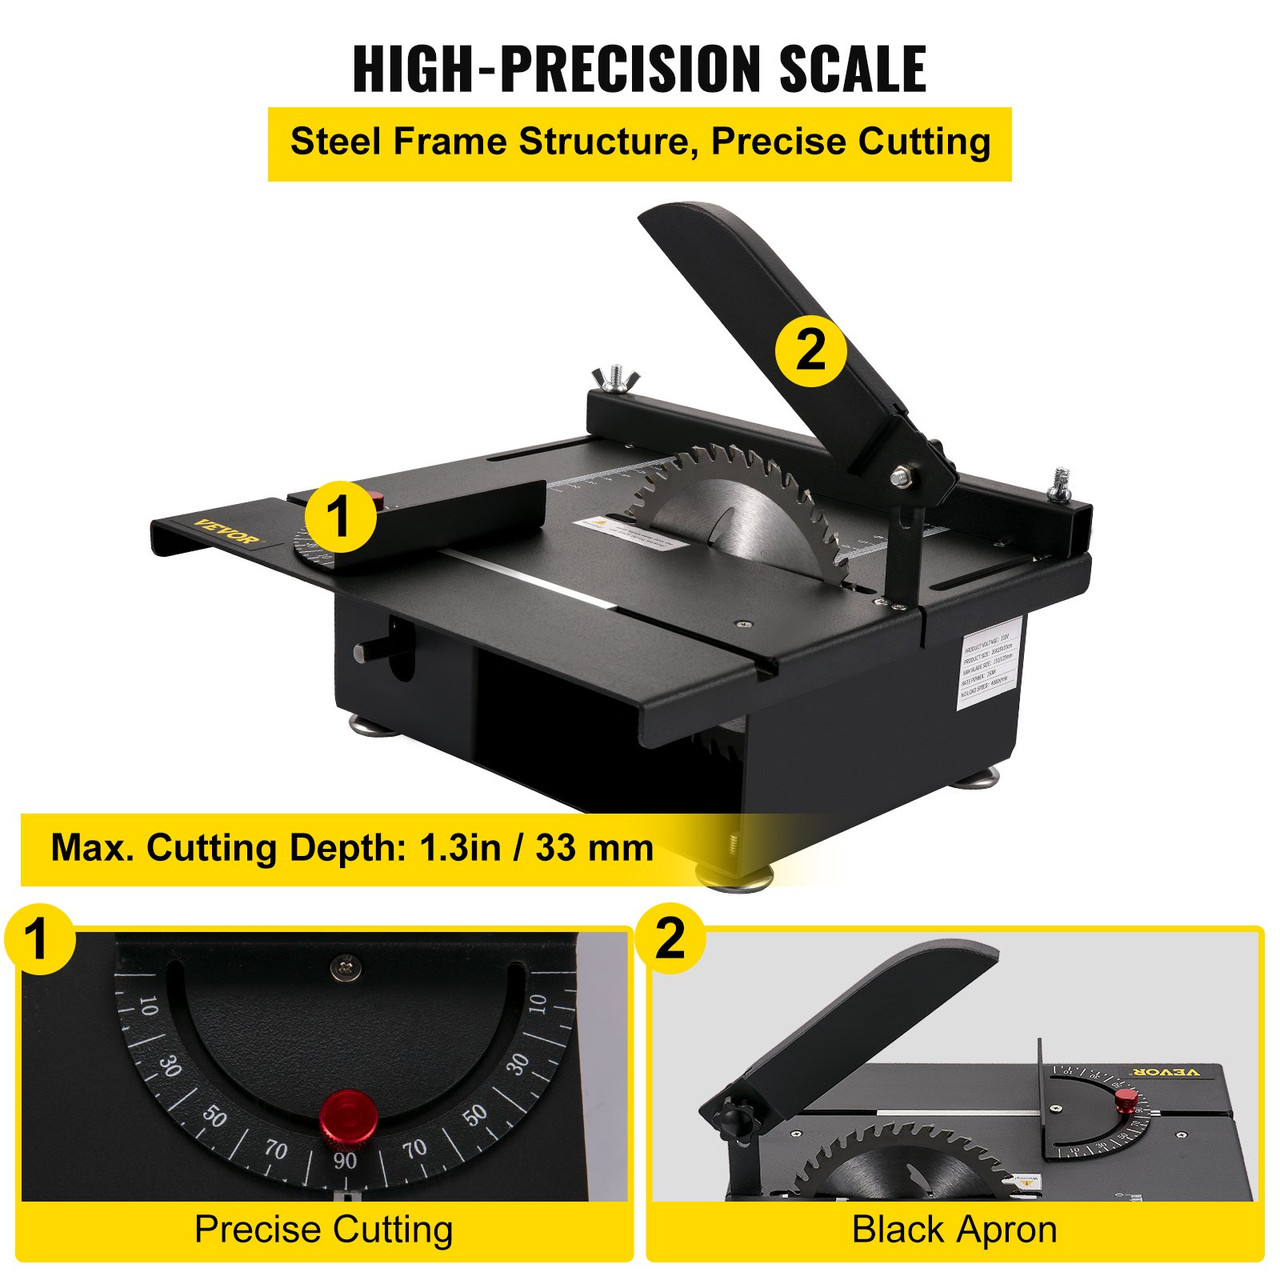 Mini Table Saw, 200W Hobby Table Saw for Woodworking, 0-90 Angle Cutting Portable DIY Saw, 4000RMP Multifunctional Table Saws, 1.57in Cutting Depth with Black Apron (Cutting/Polishing Set)